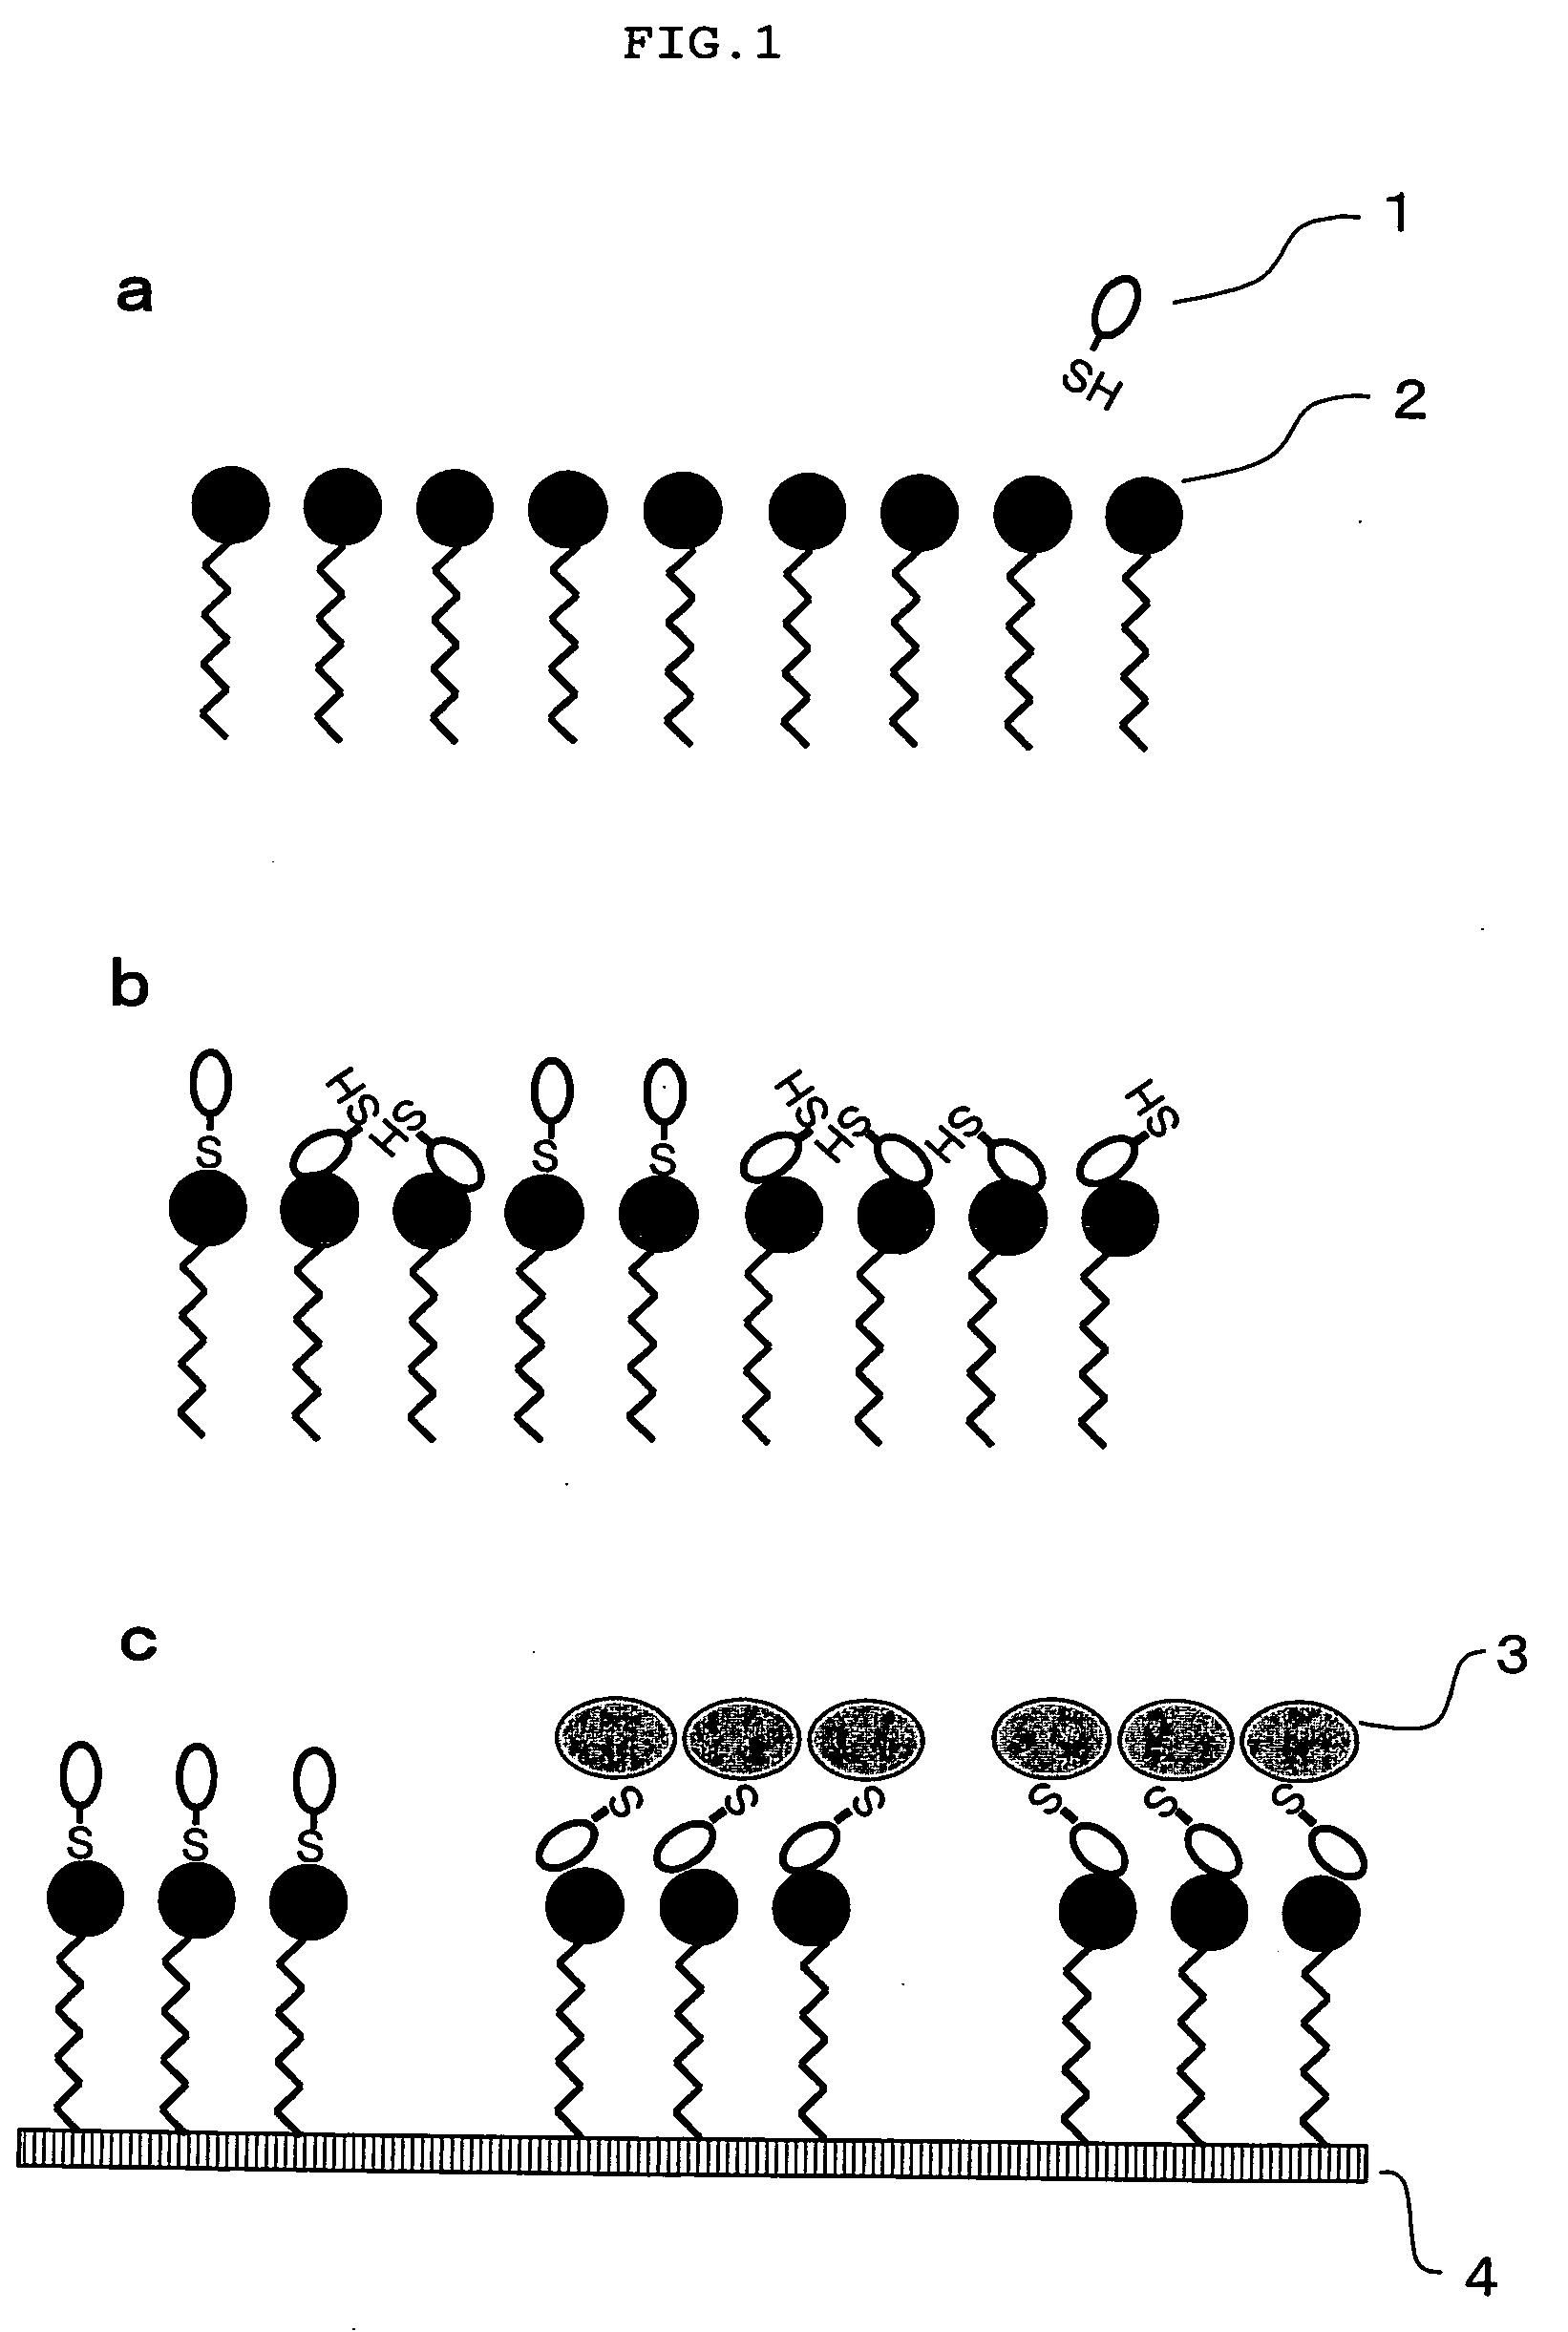 Method of fixing low-molecular compound to solid-phase support